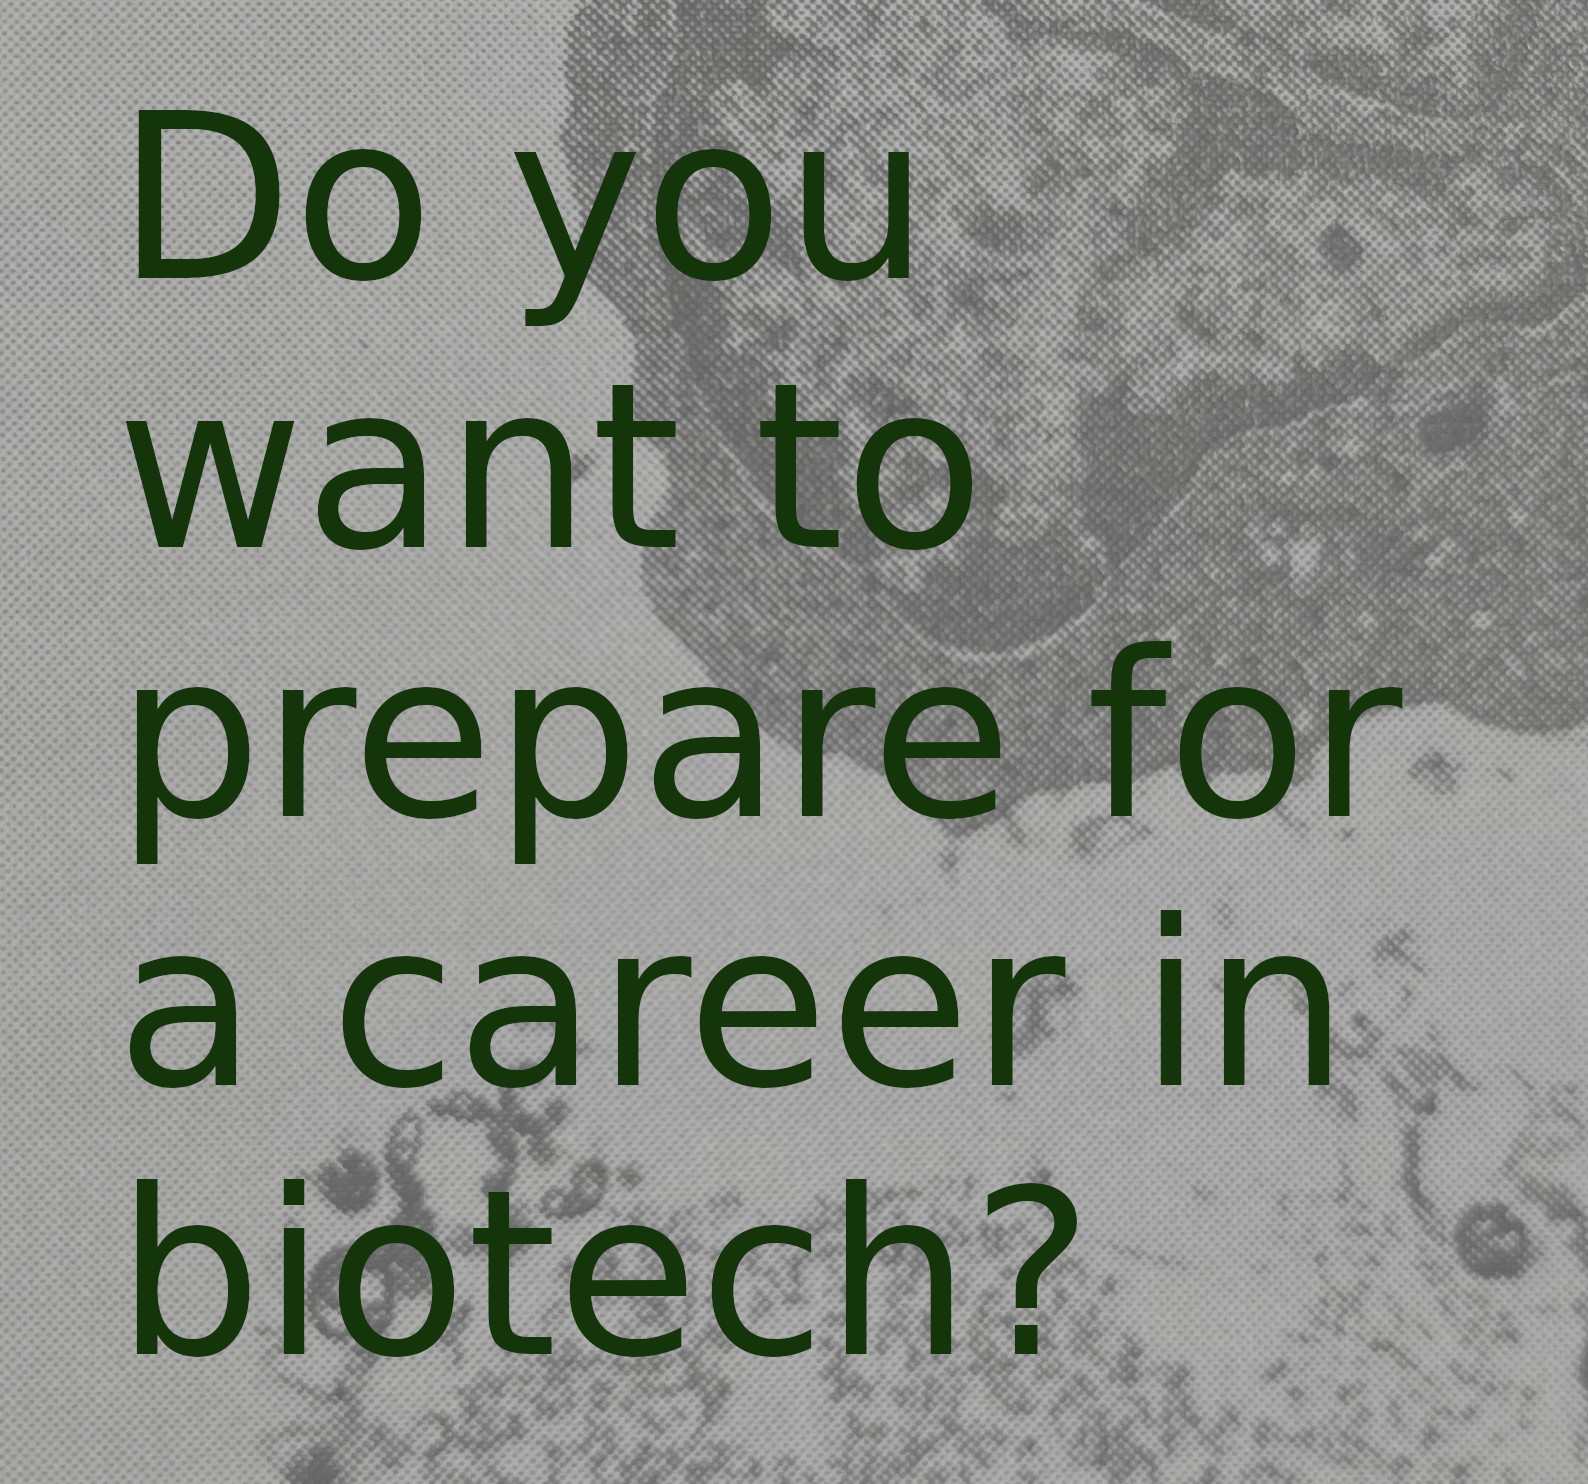 Do you want to prepare for a career in biotech?